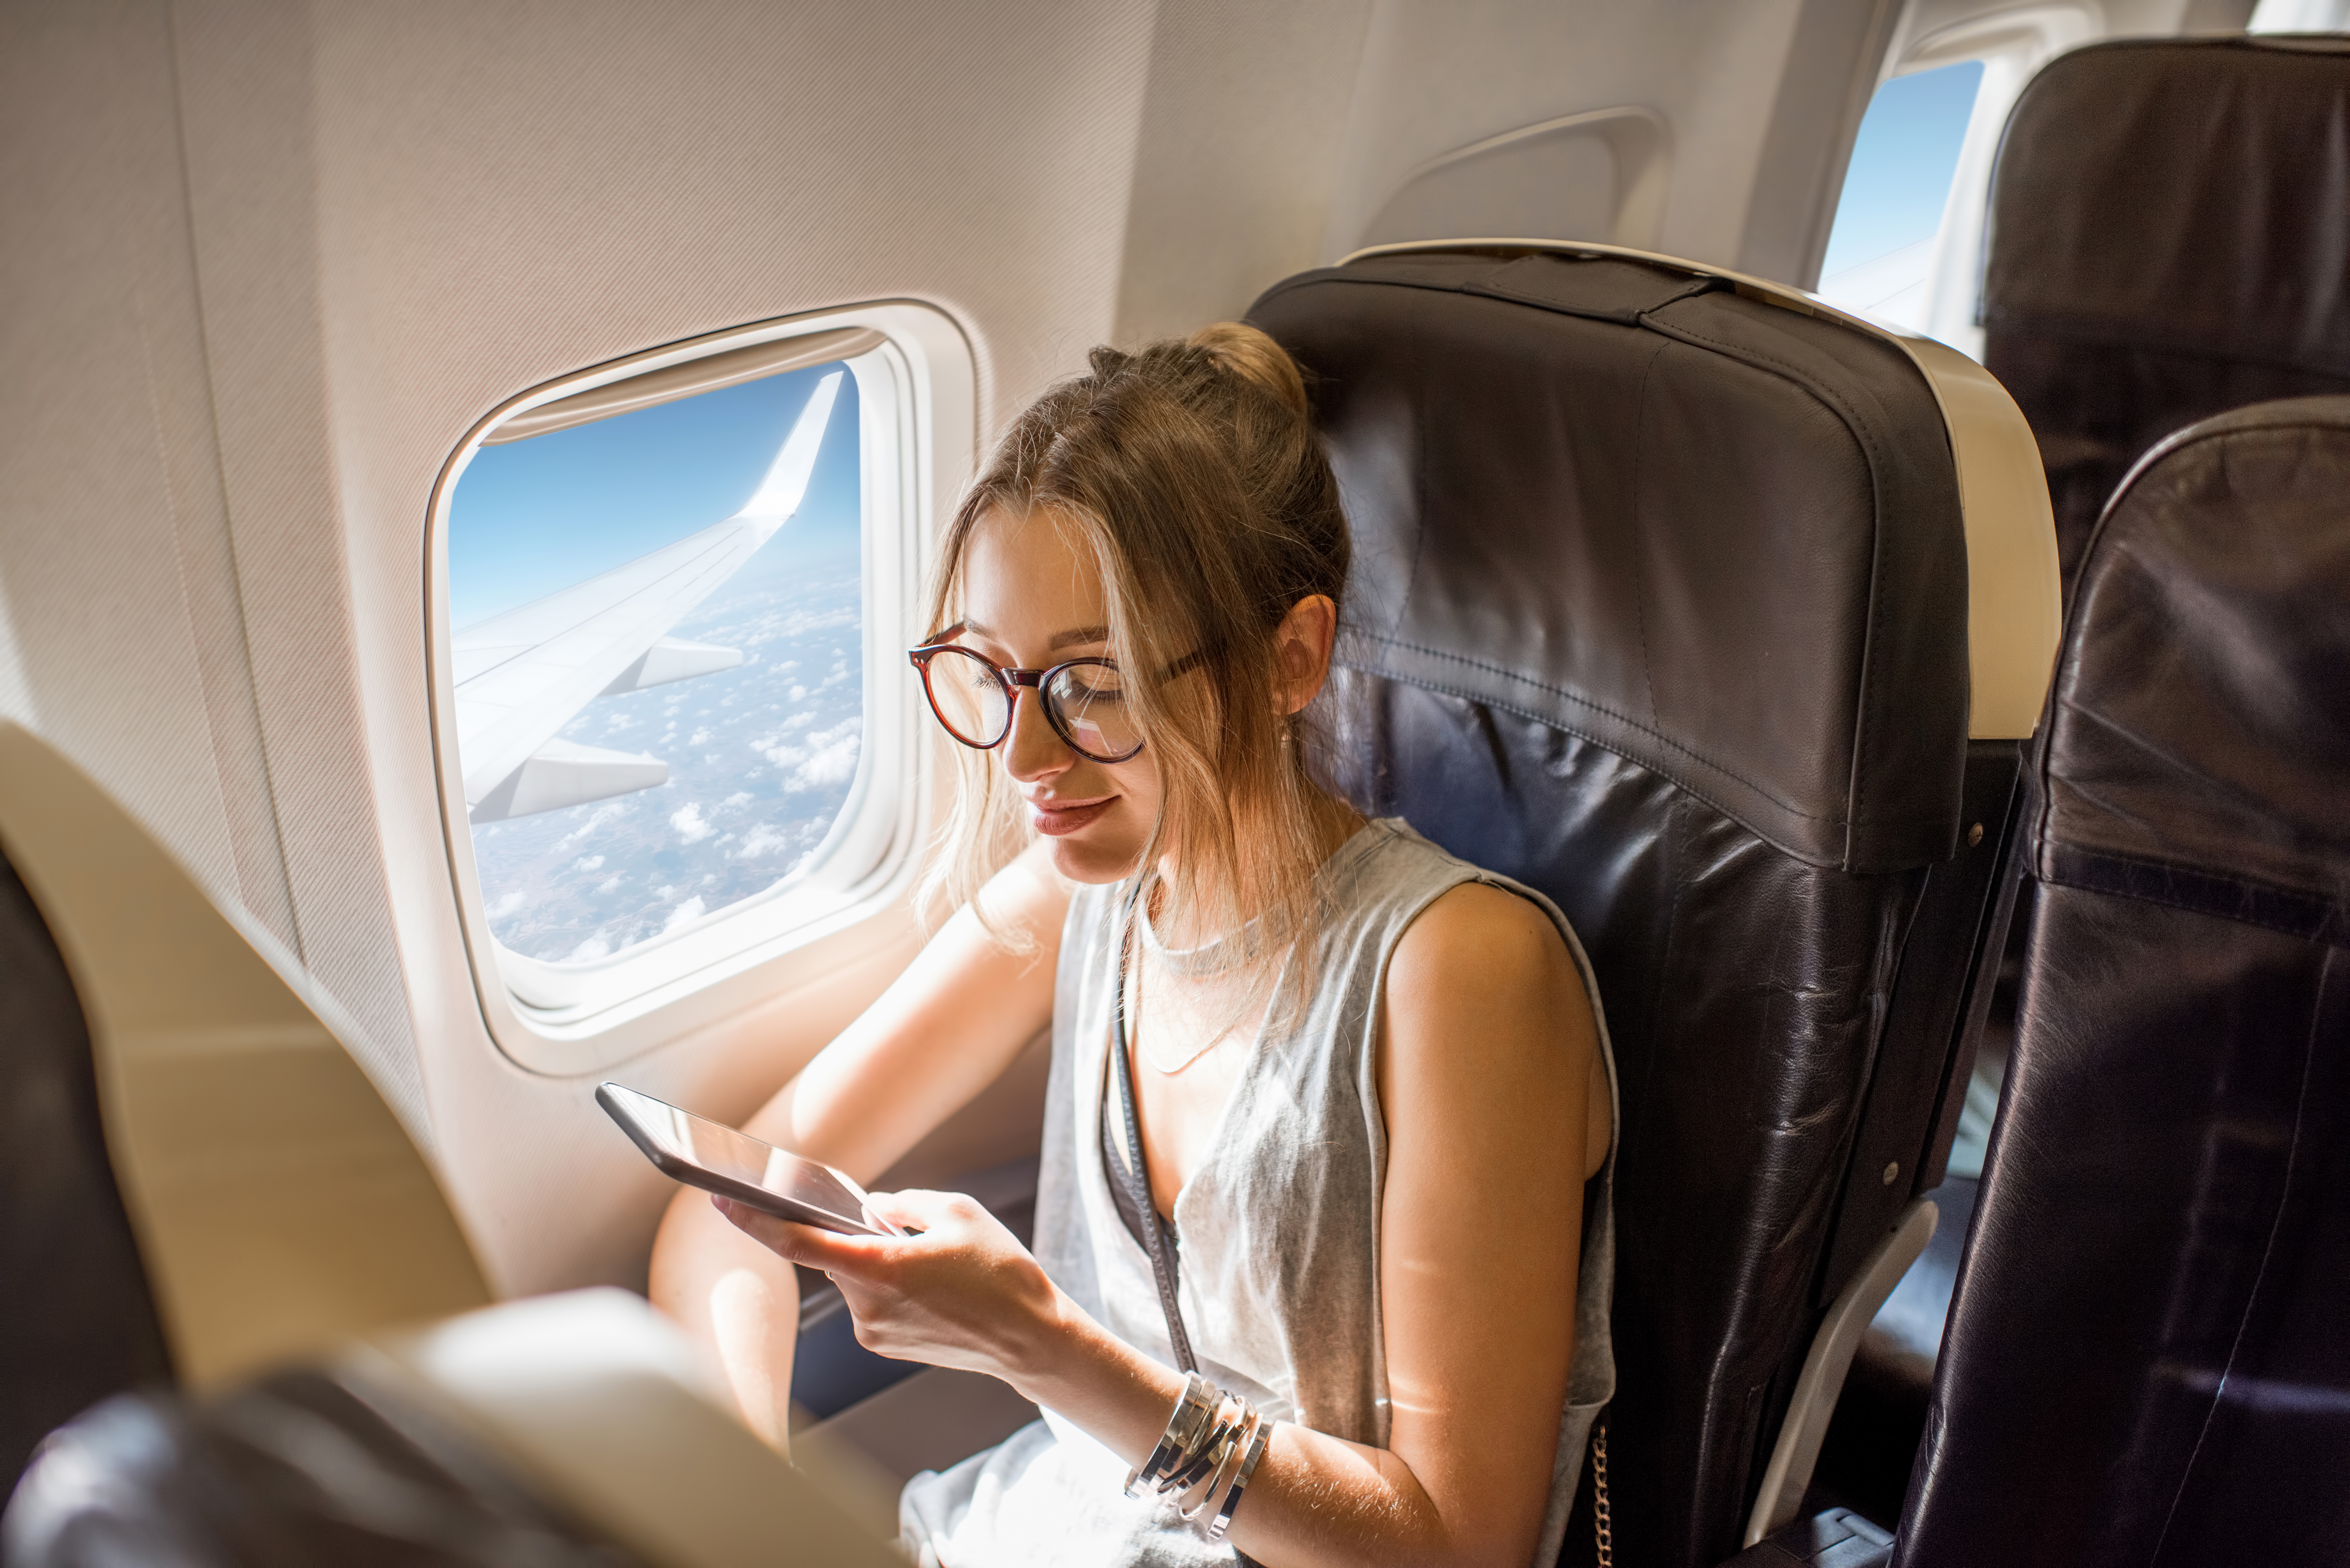 A woman using her phone in an airplane | Source: Shutterstock